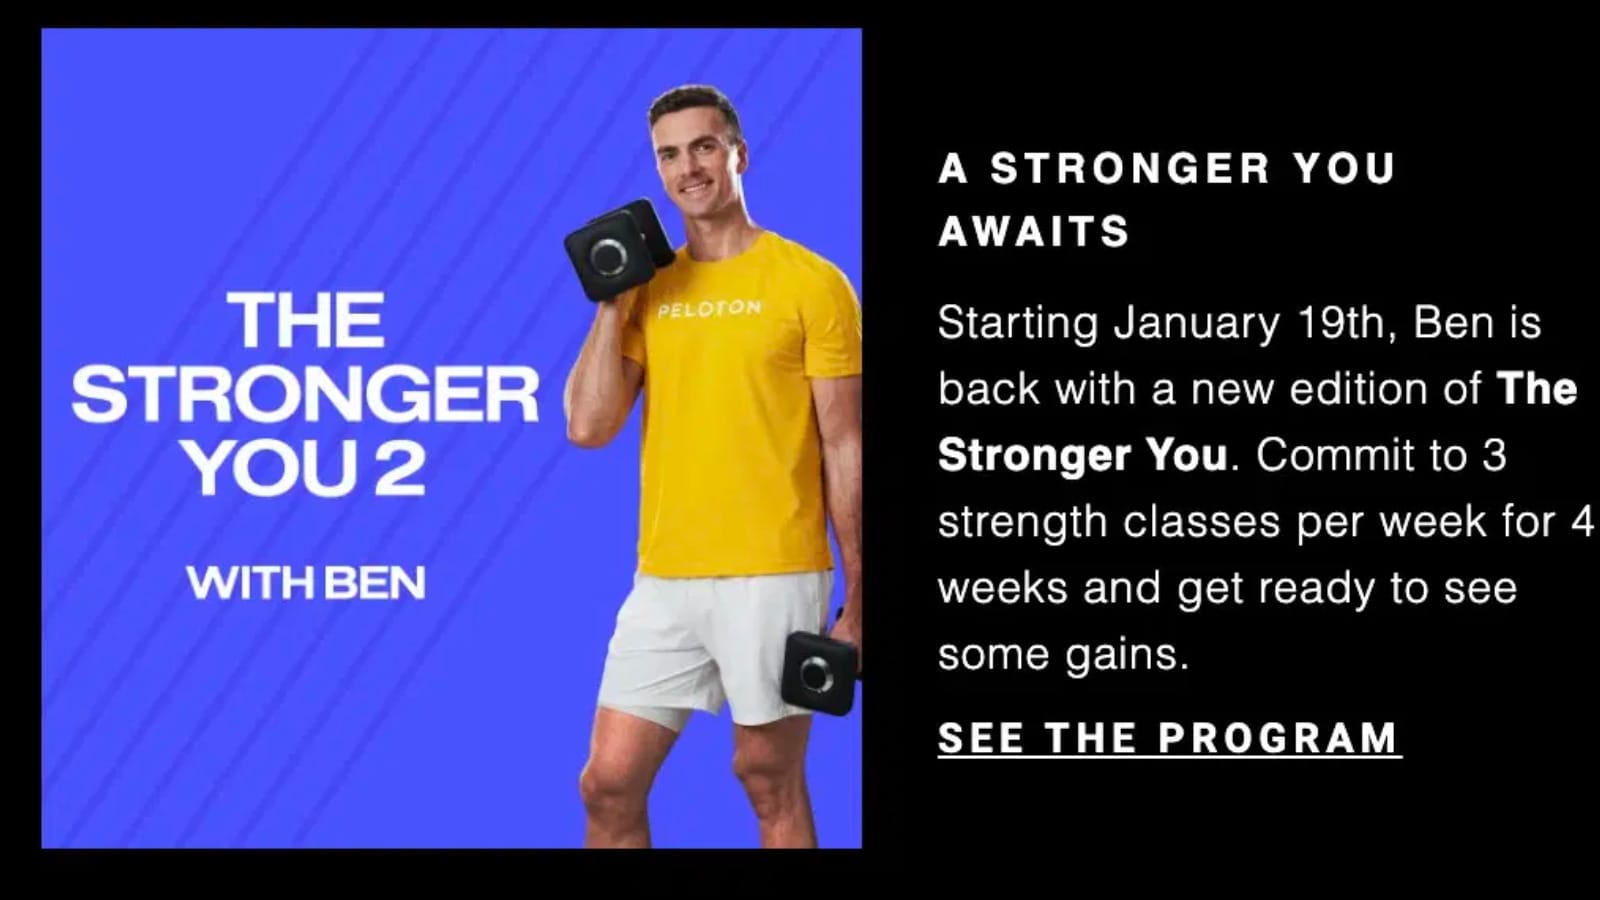 The Stronger You 2 Peloton strength training program with Ben Alldis comes out next week.